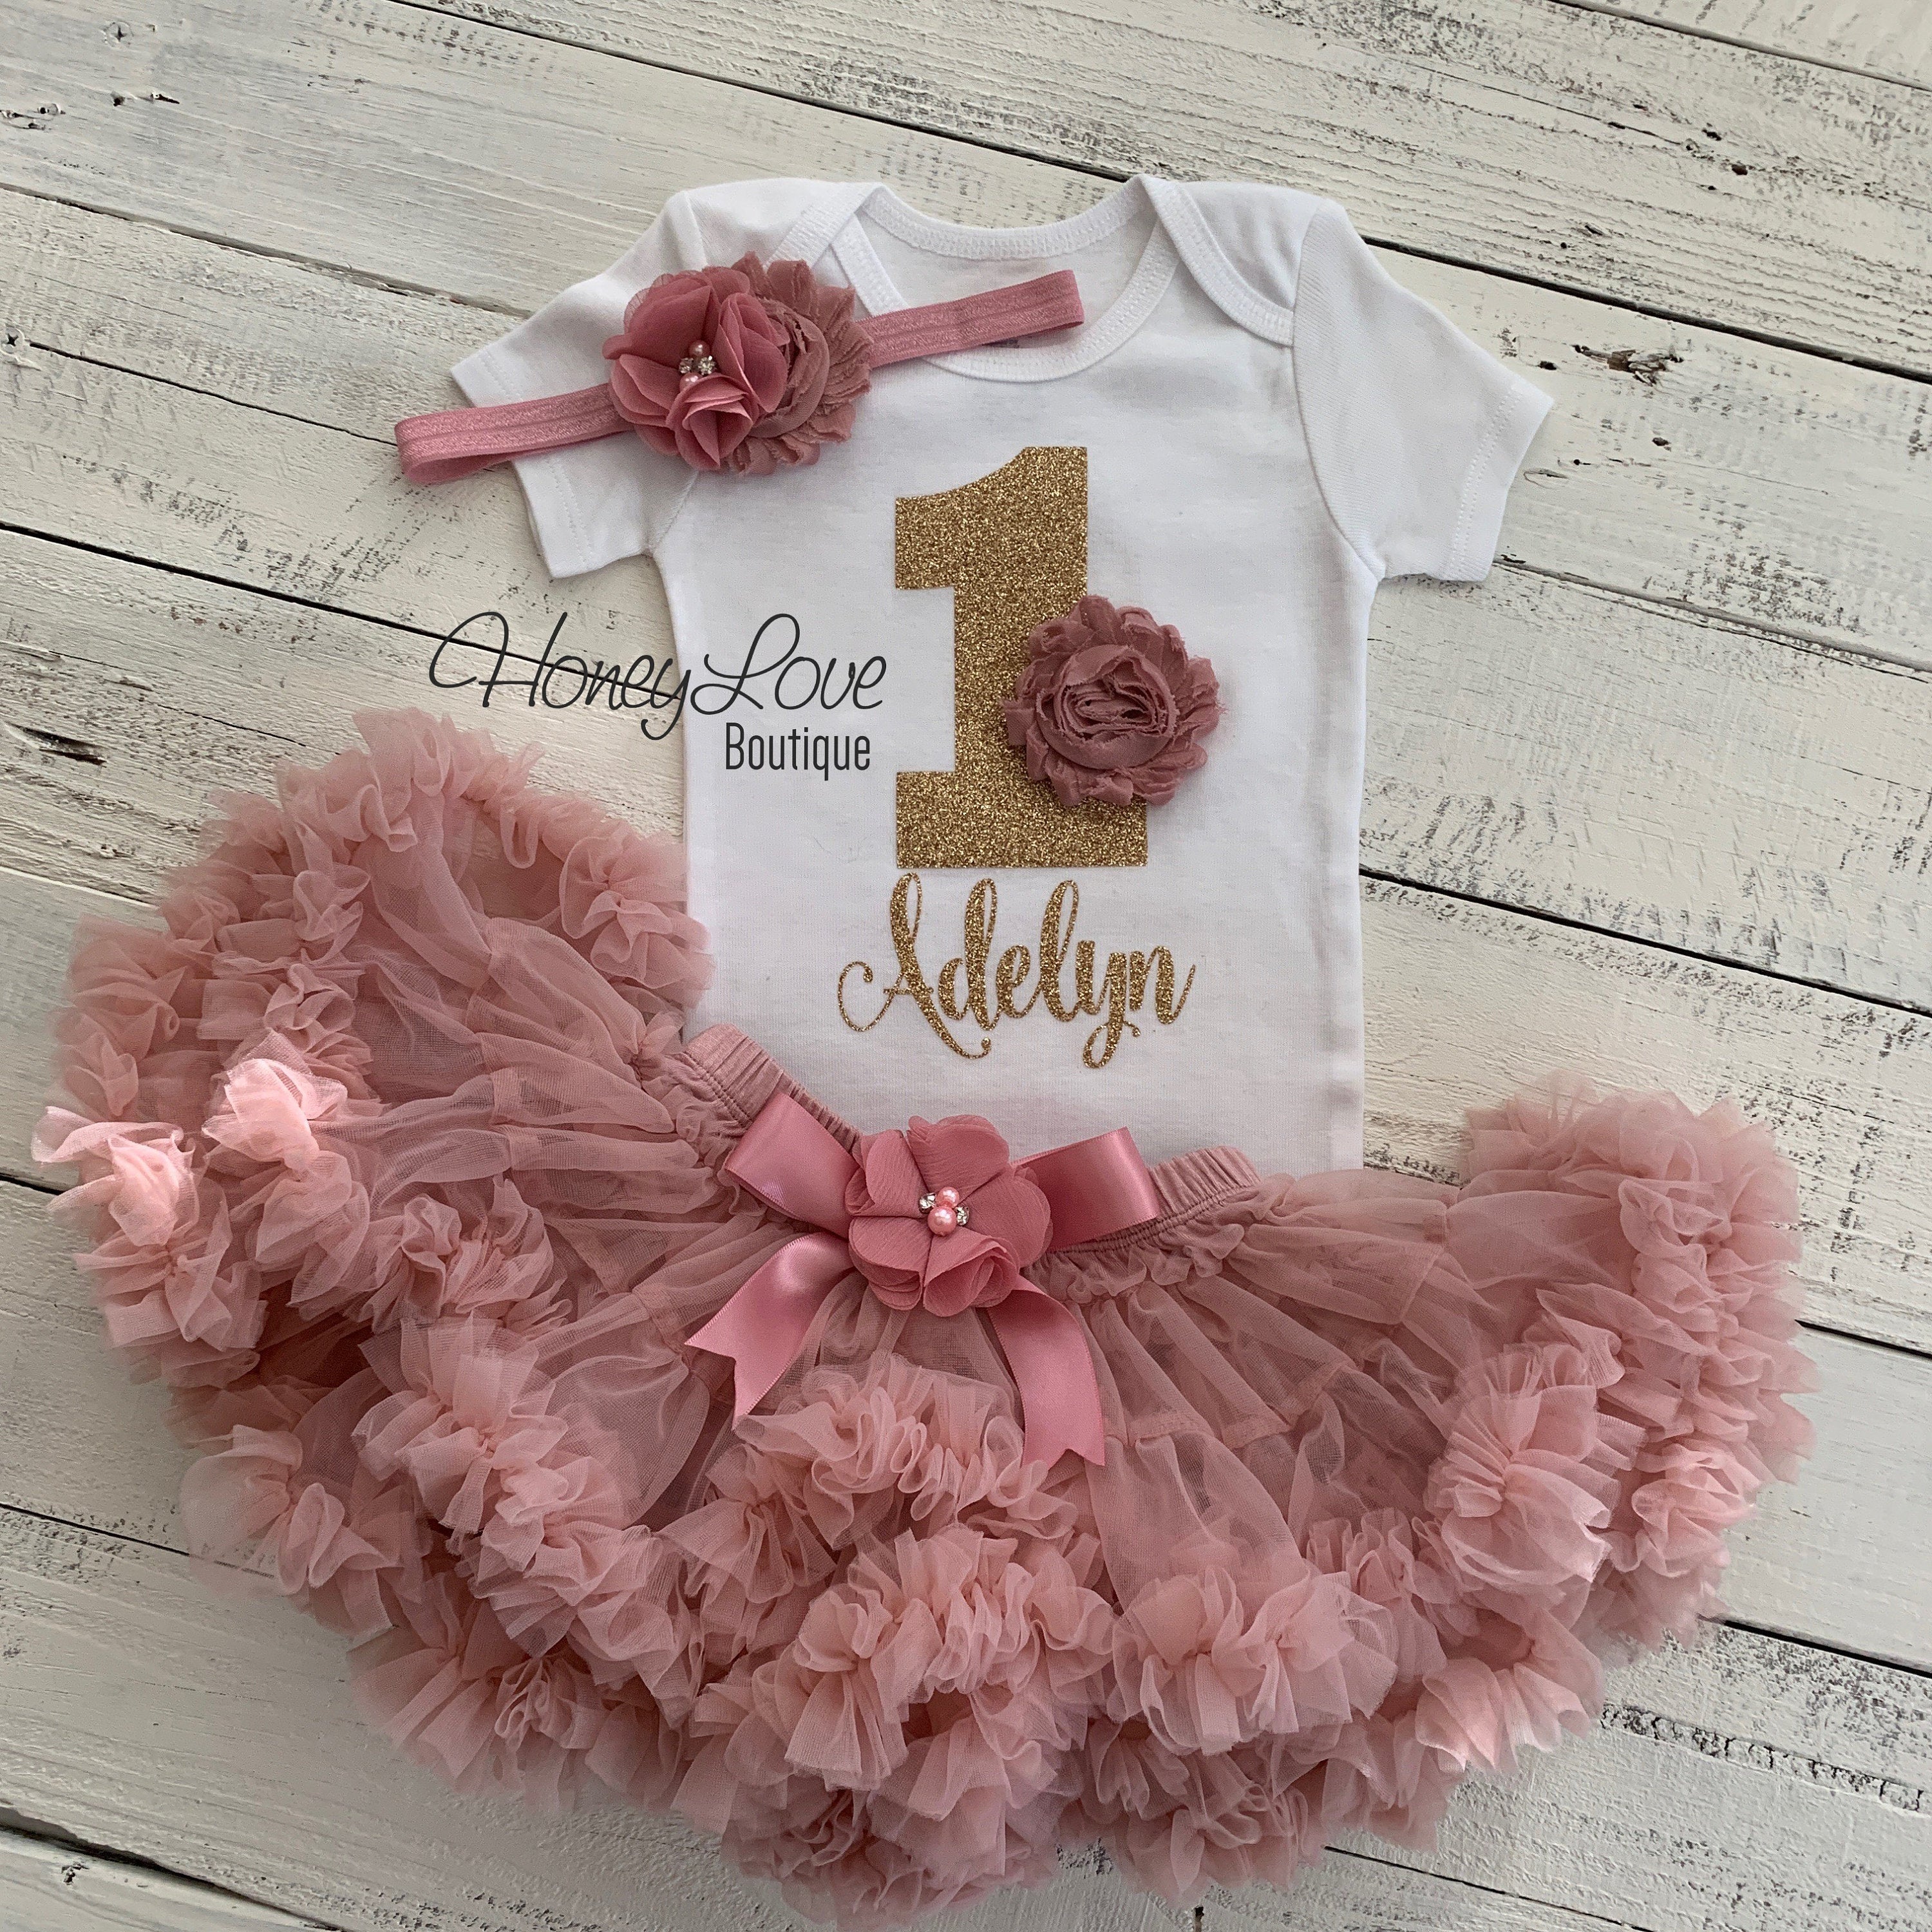 personalized first birthday outfit